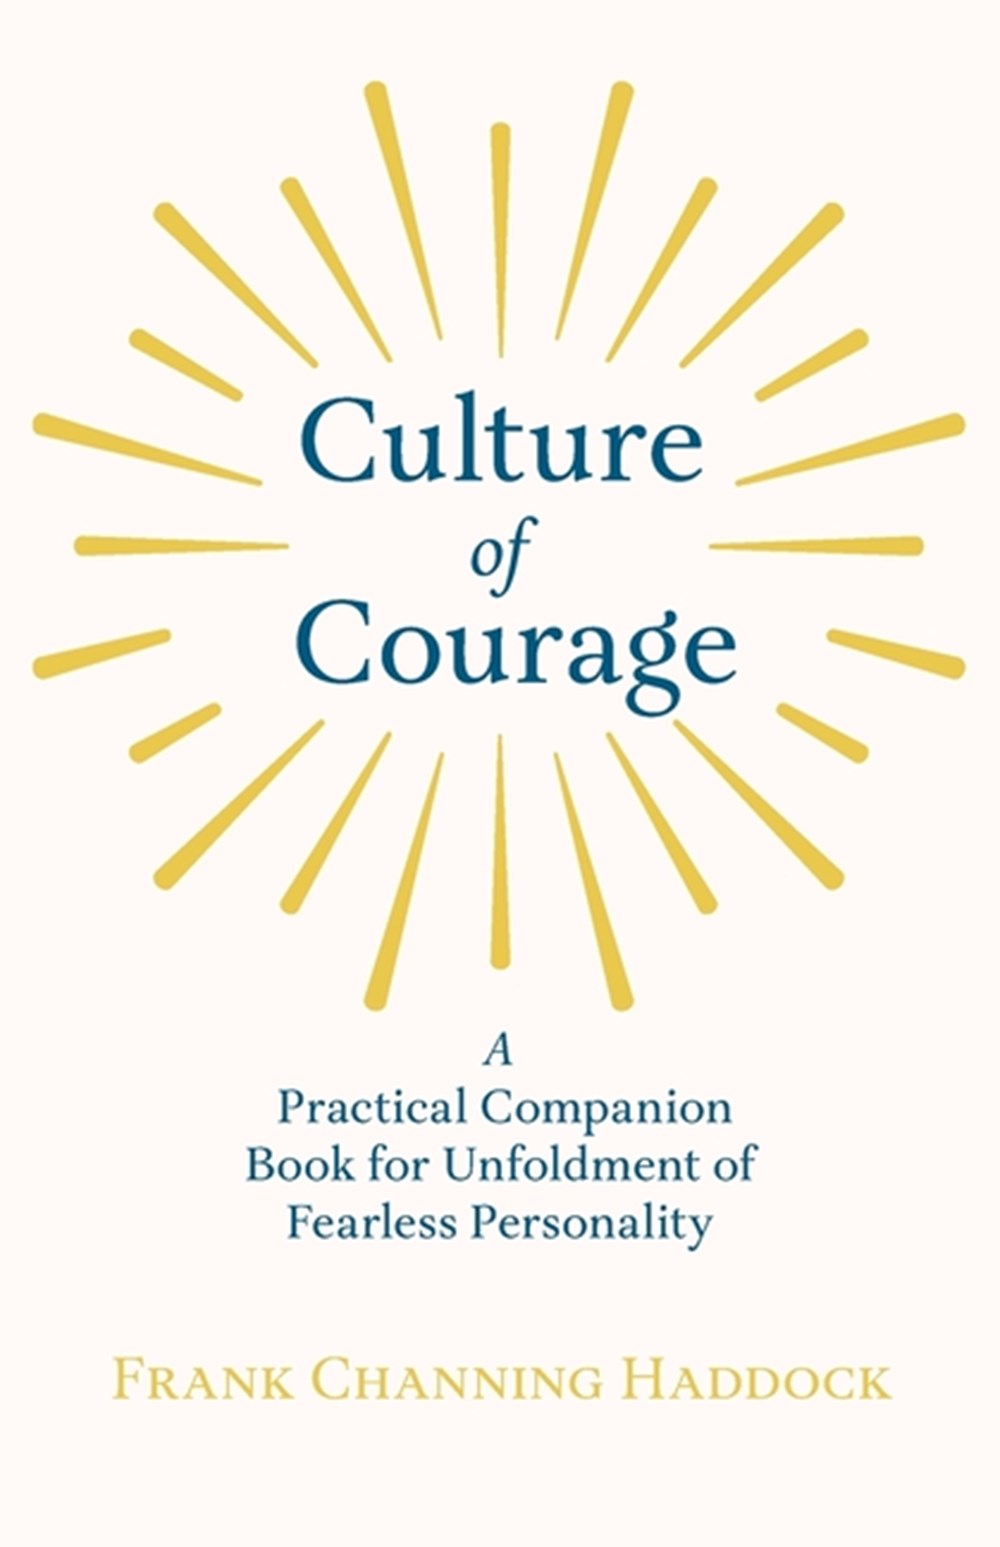 Culture of Courage - A Practical Companion Book for Unfoldment of Fearless Personality With an Essay